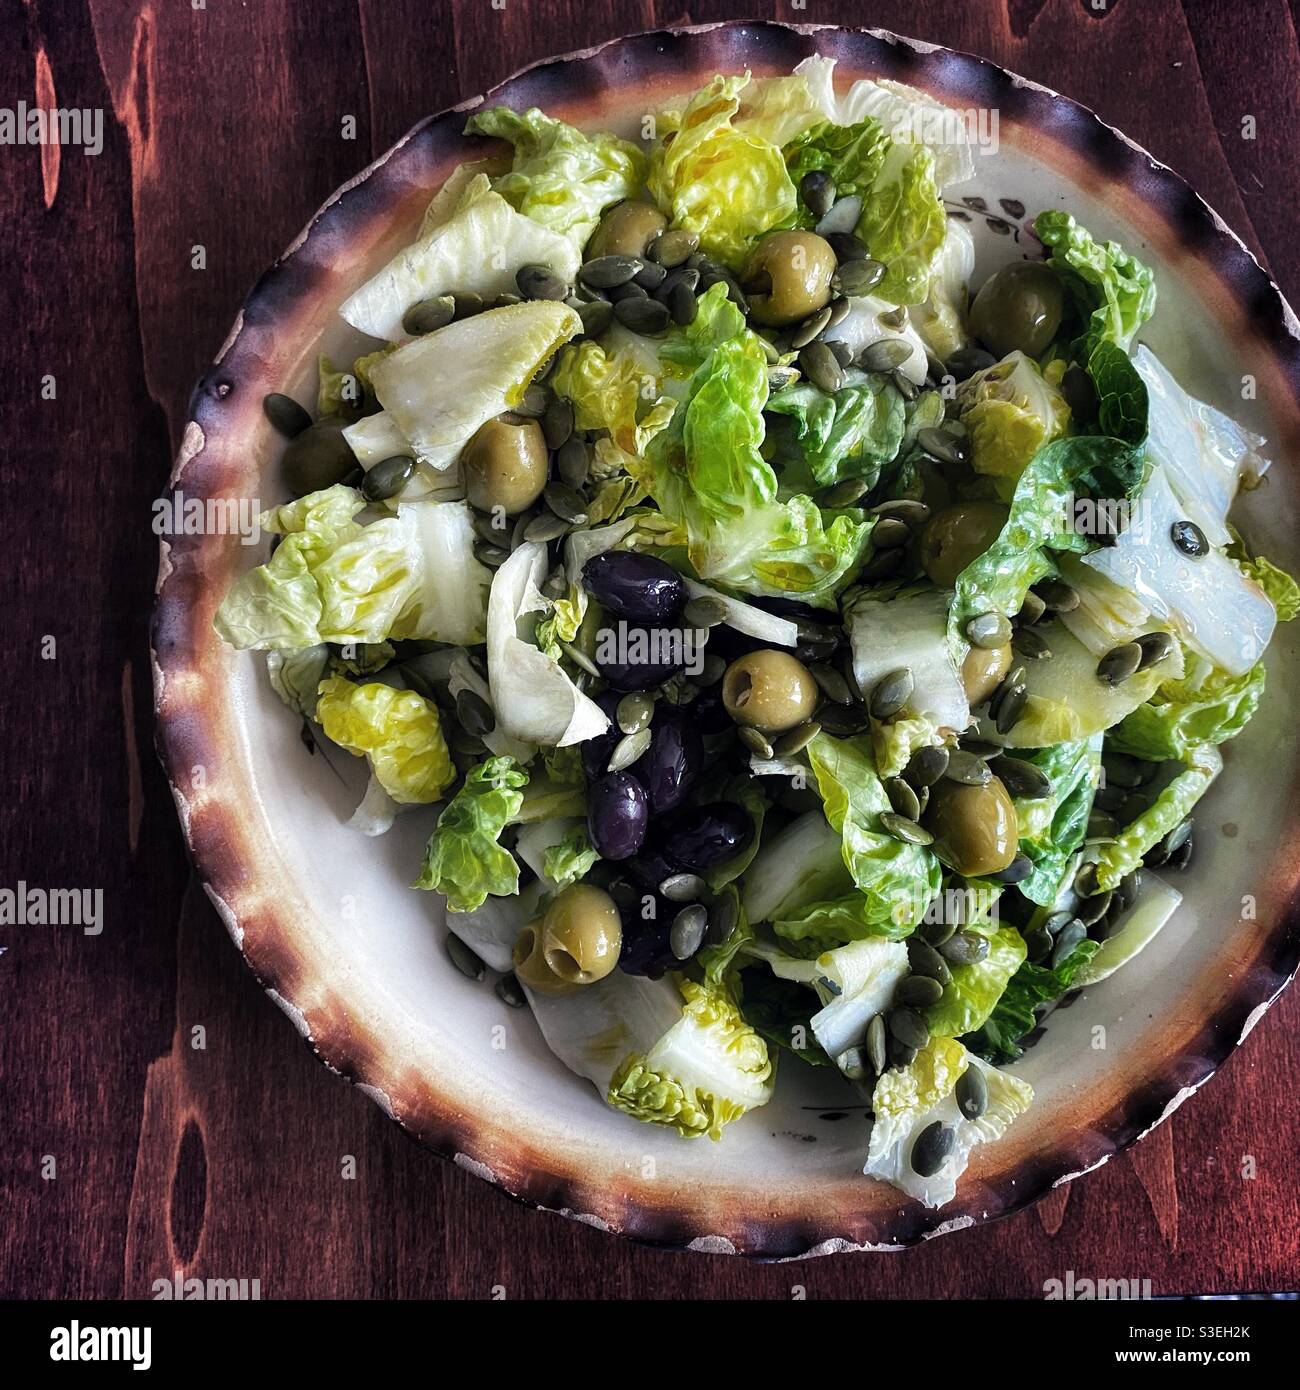 Green salad with olives on a vintage bowl Stock Photo